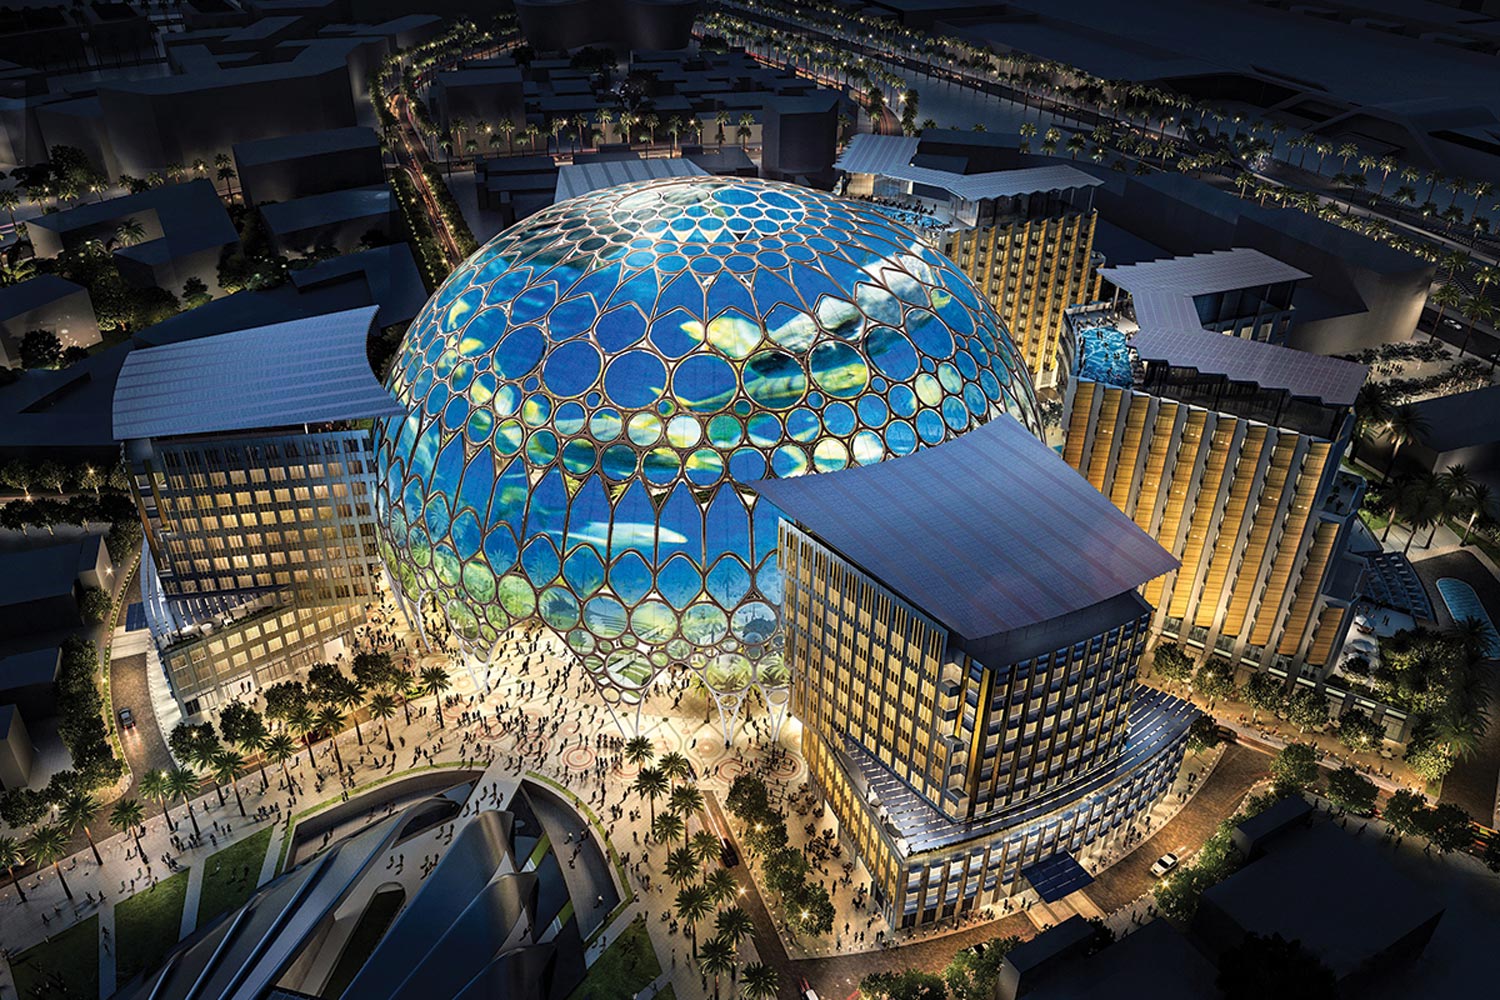 UAE is ready for Expo 2020, says His Highness Sheikh Mohammed bin